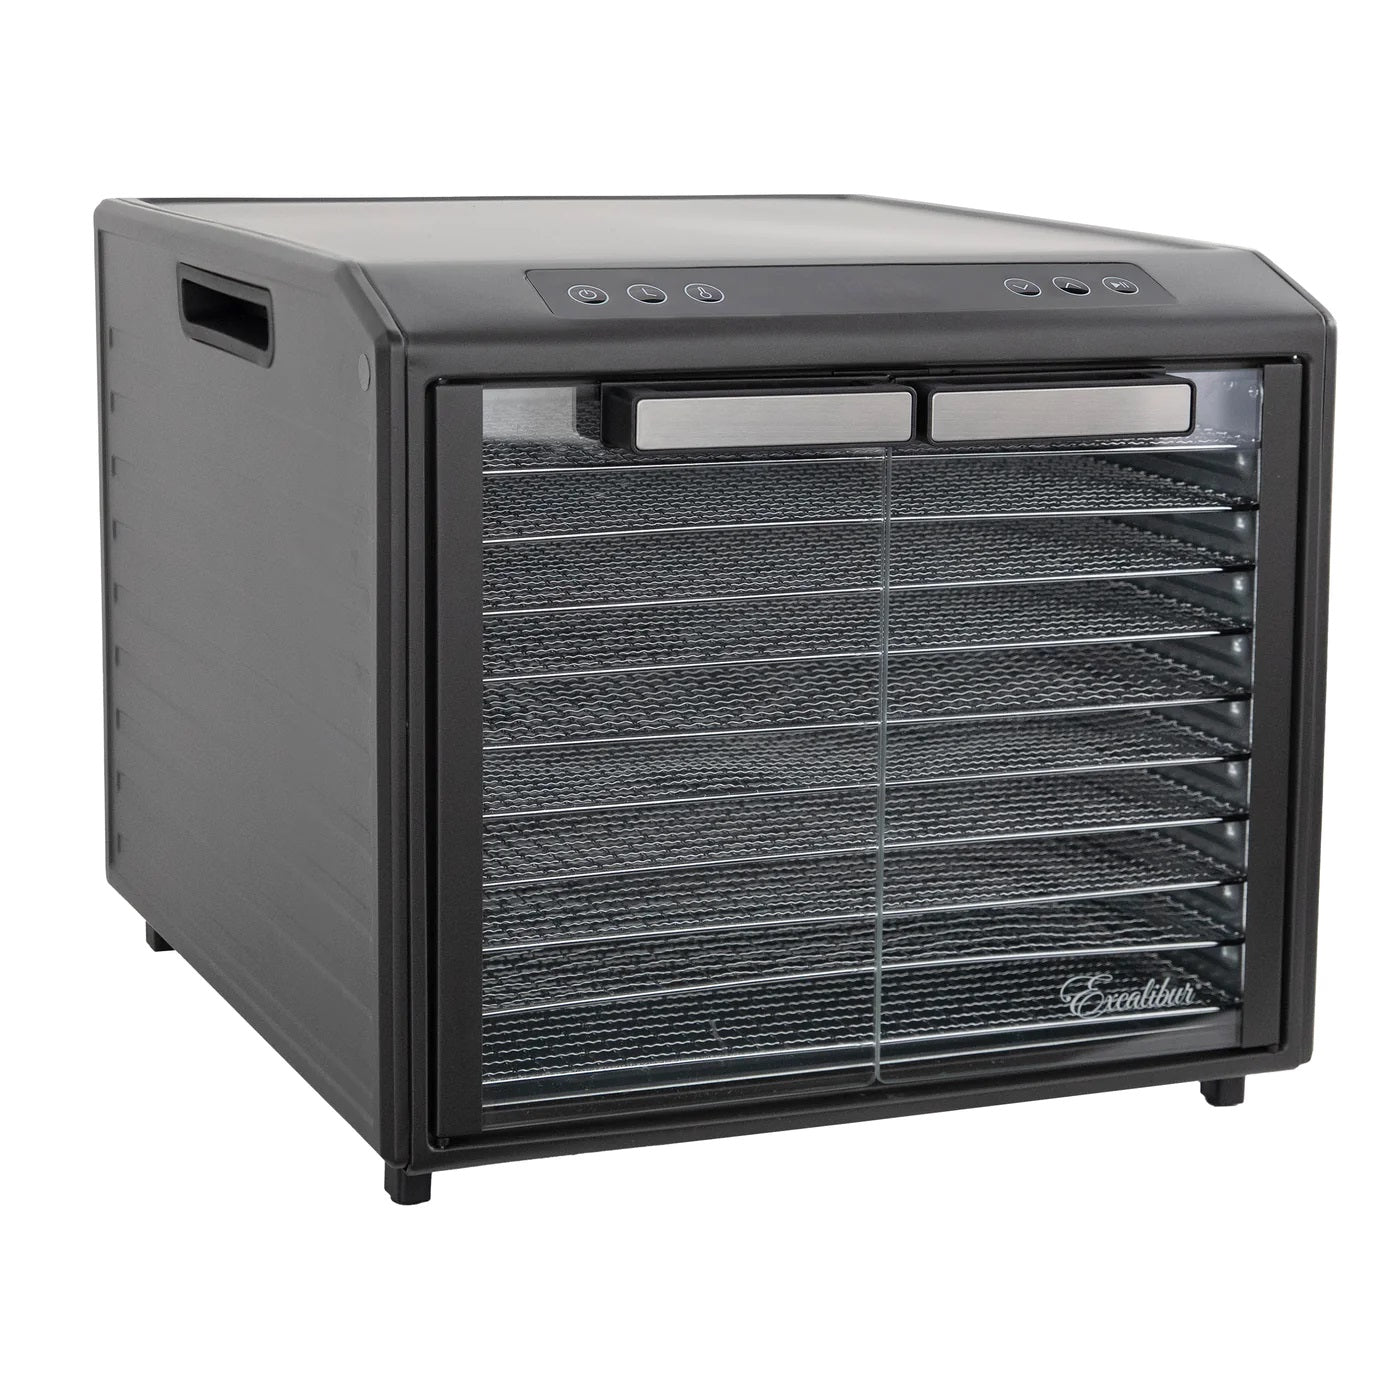 Excalibur DH10SC dehydrator with clear doors closed.